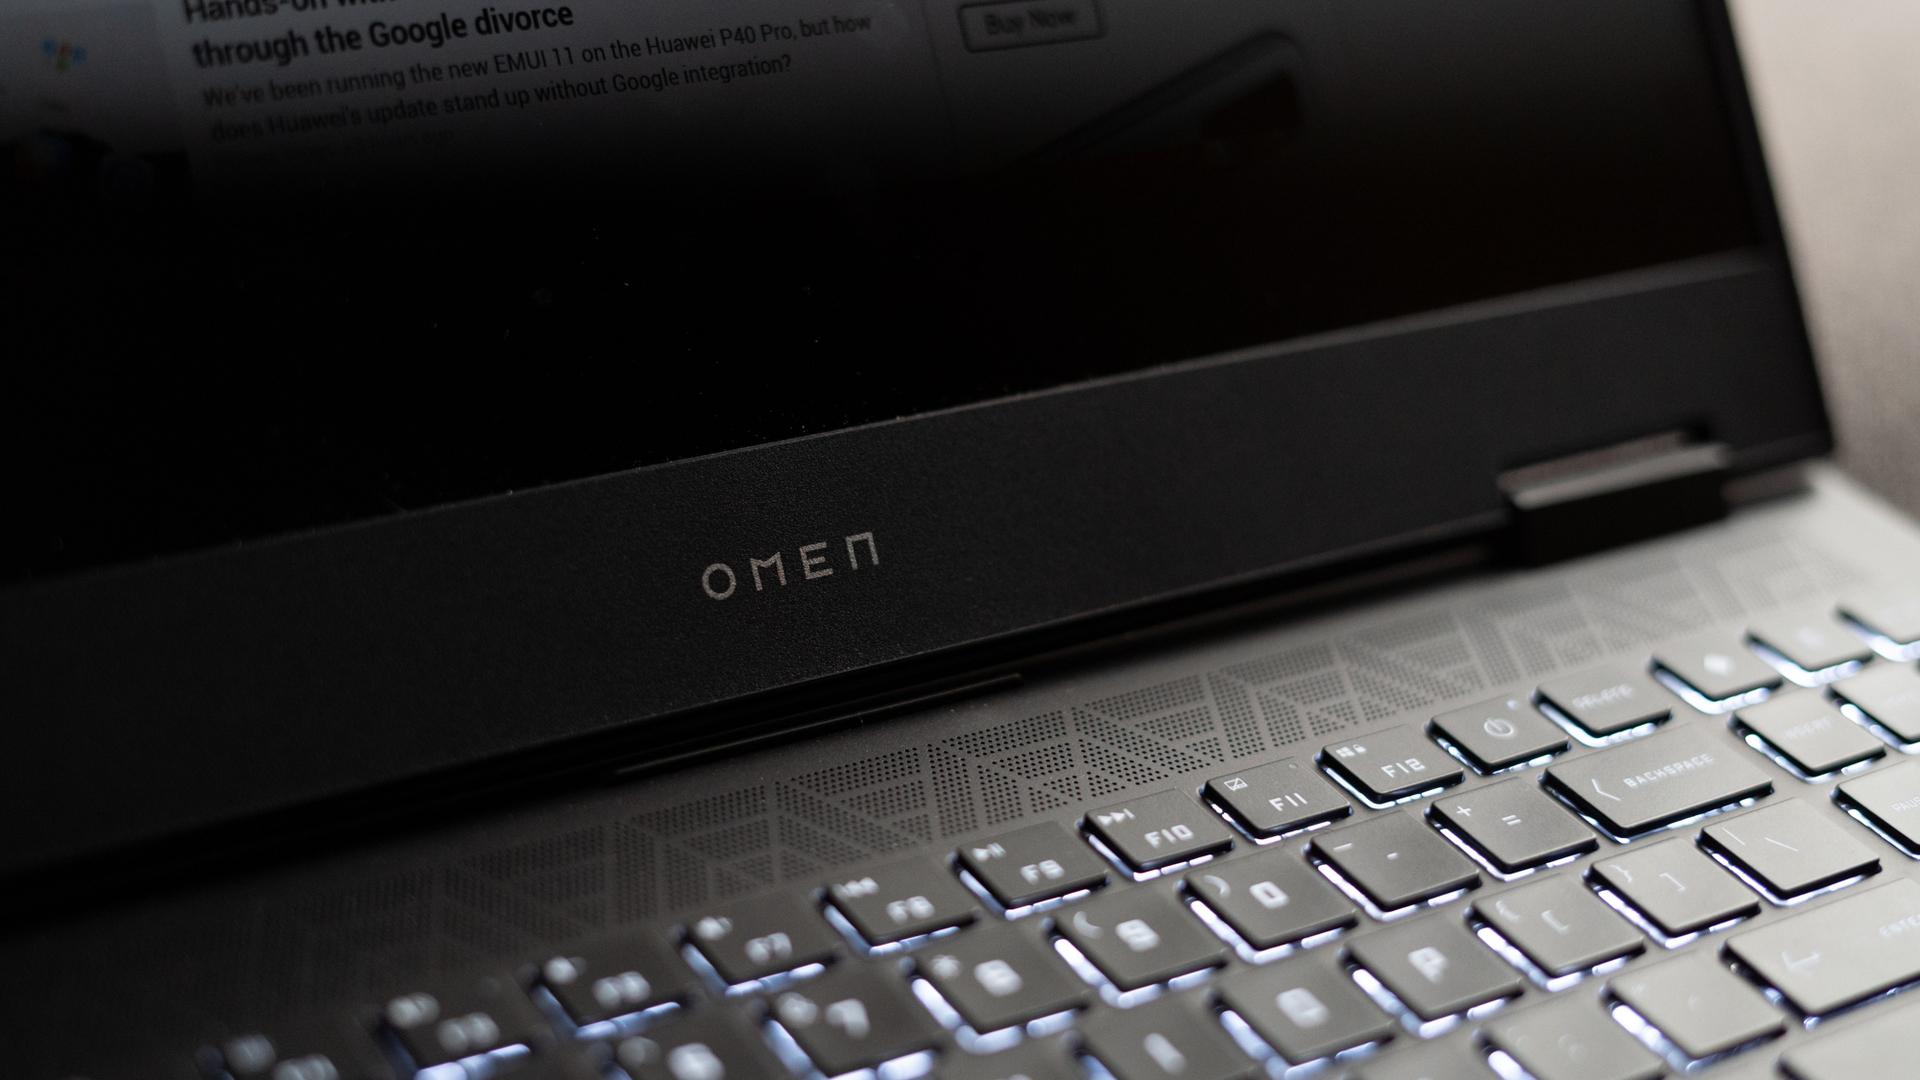 https://www.androidauthority.com/wp-content/uploads/2020/09/HP-Omen-close-up-of-logo.jpg